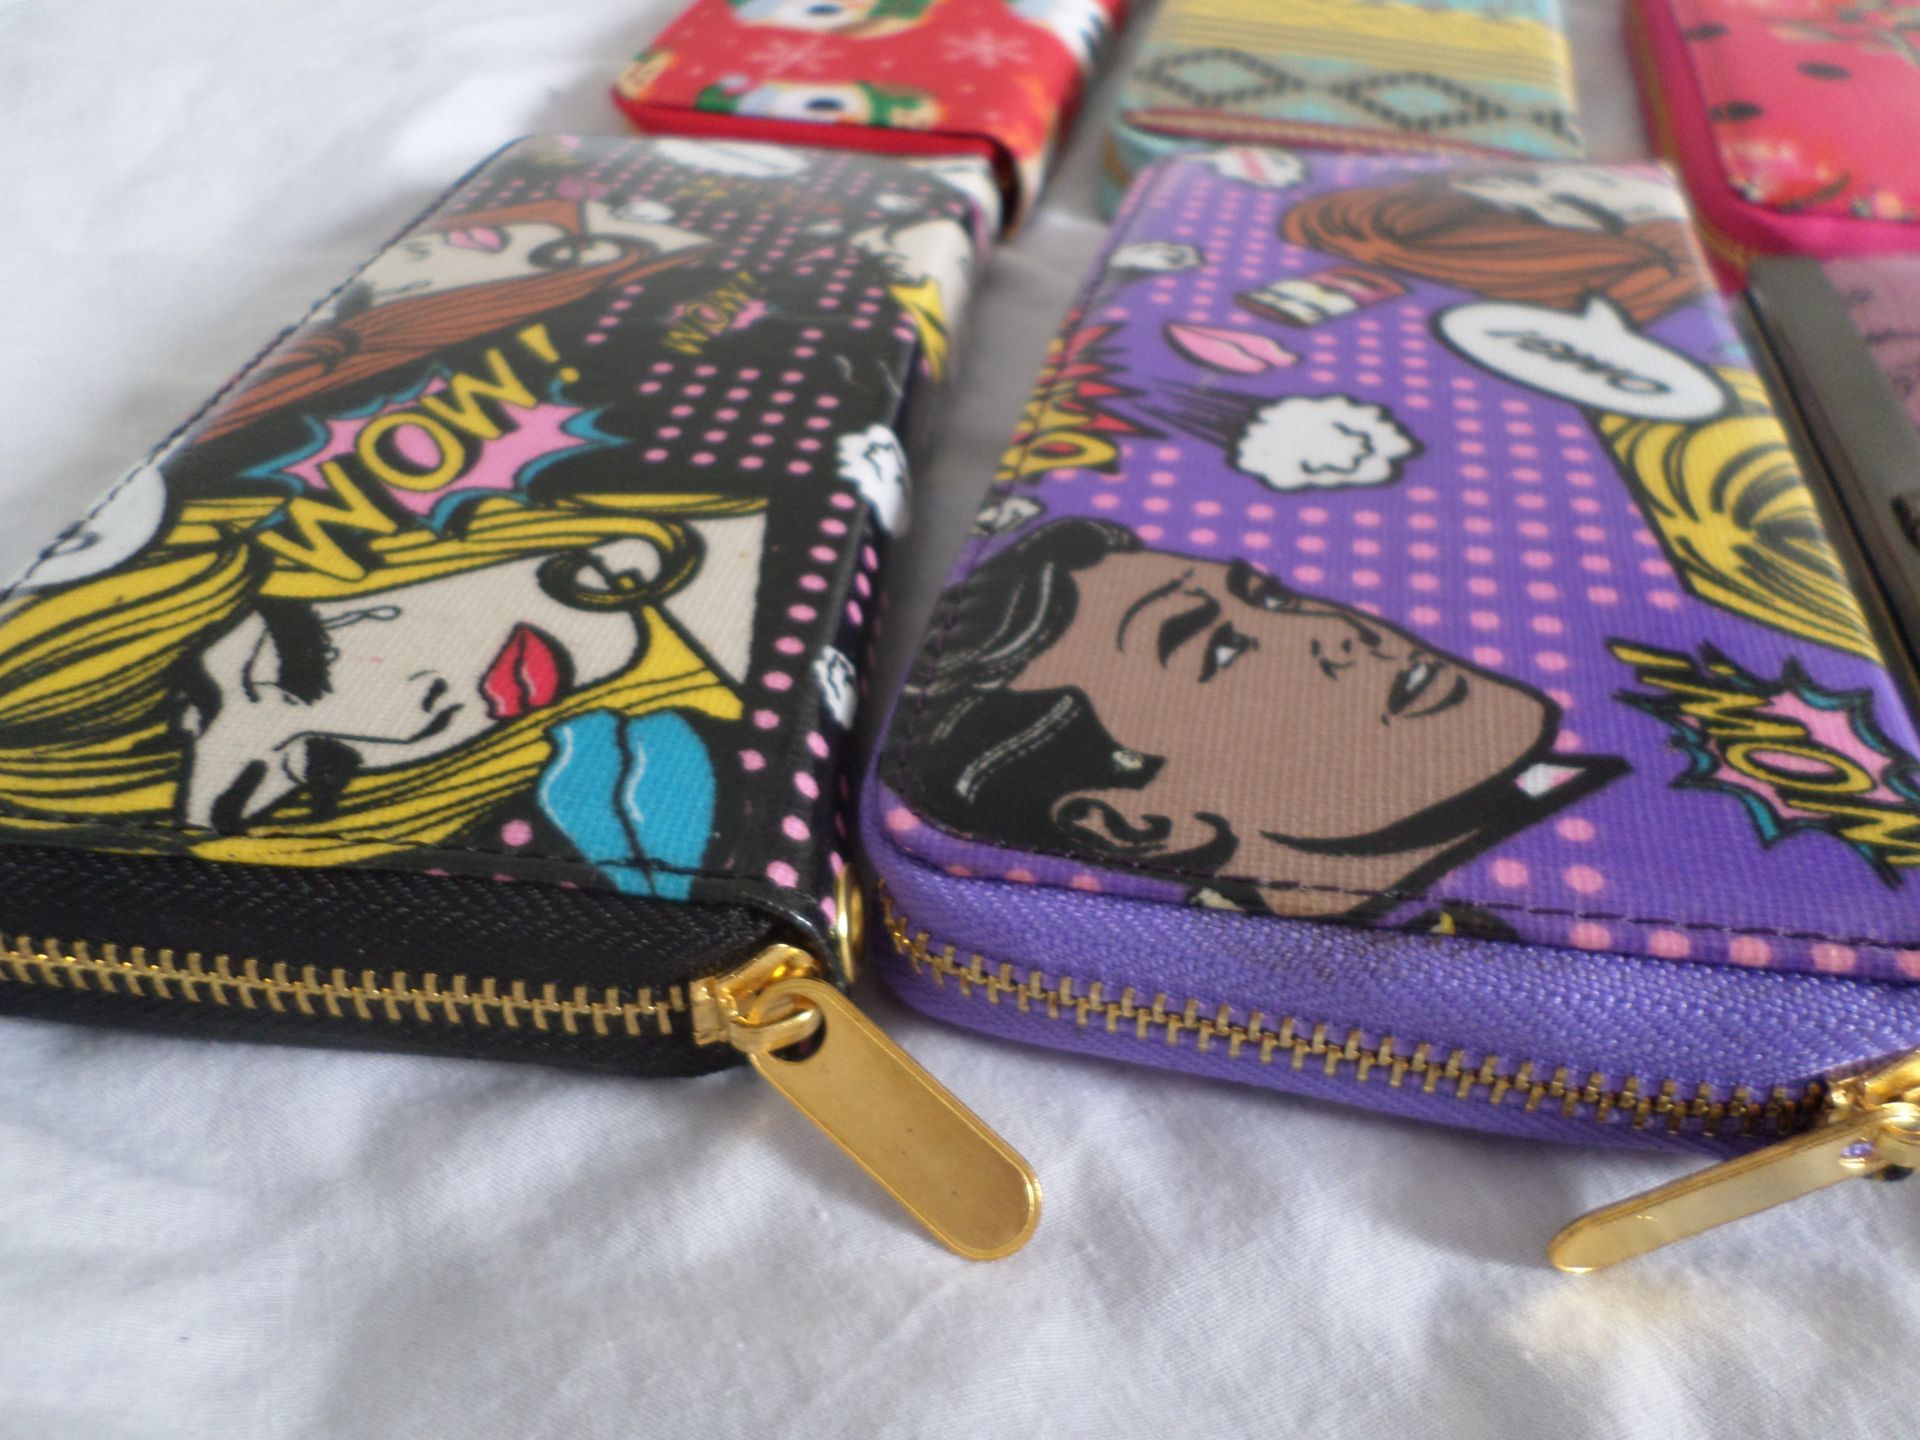 50 x Ladies Clutch/Purses RRP £14 Each. Brand New - Image 4 of 4